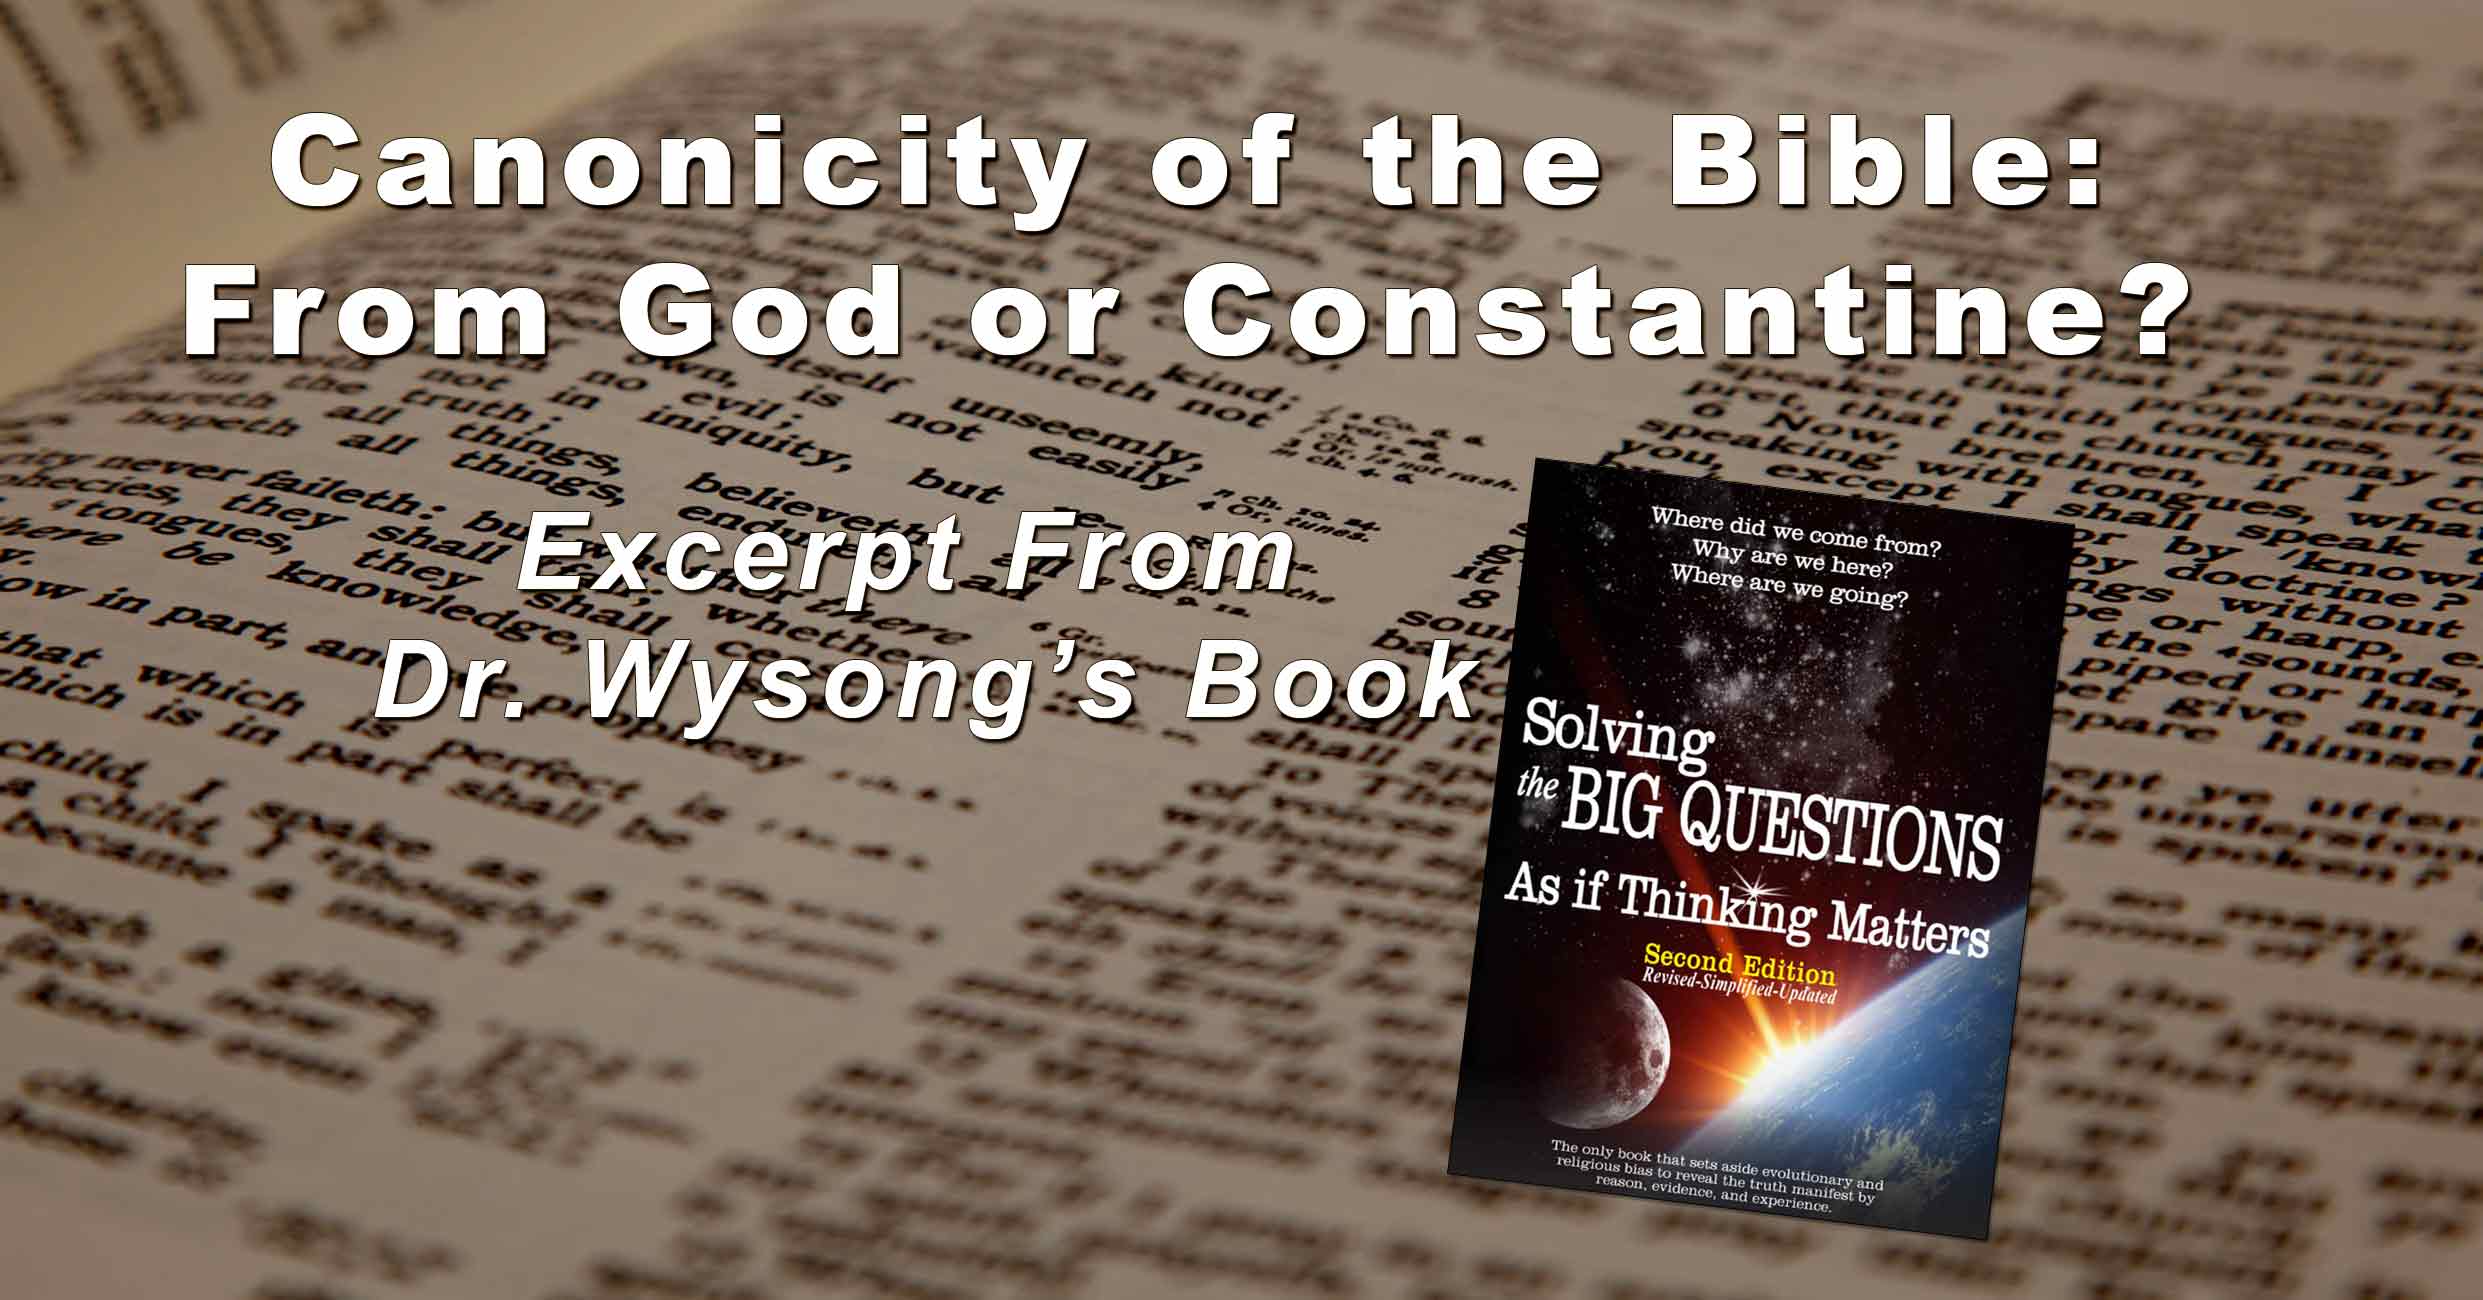 what books did constantine take out of the bible